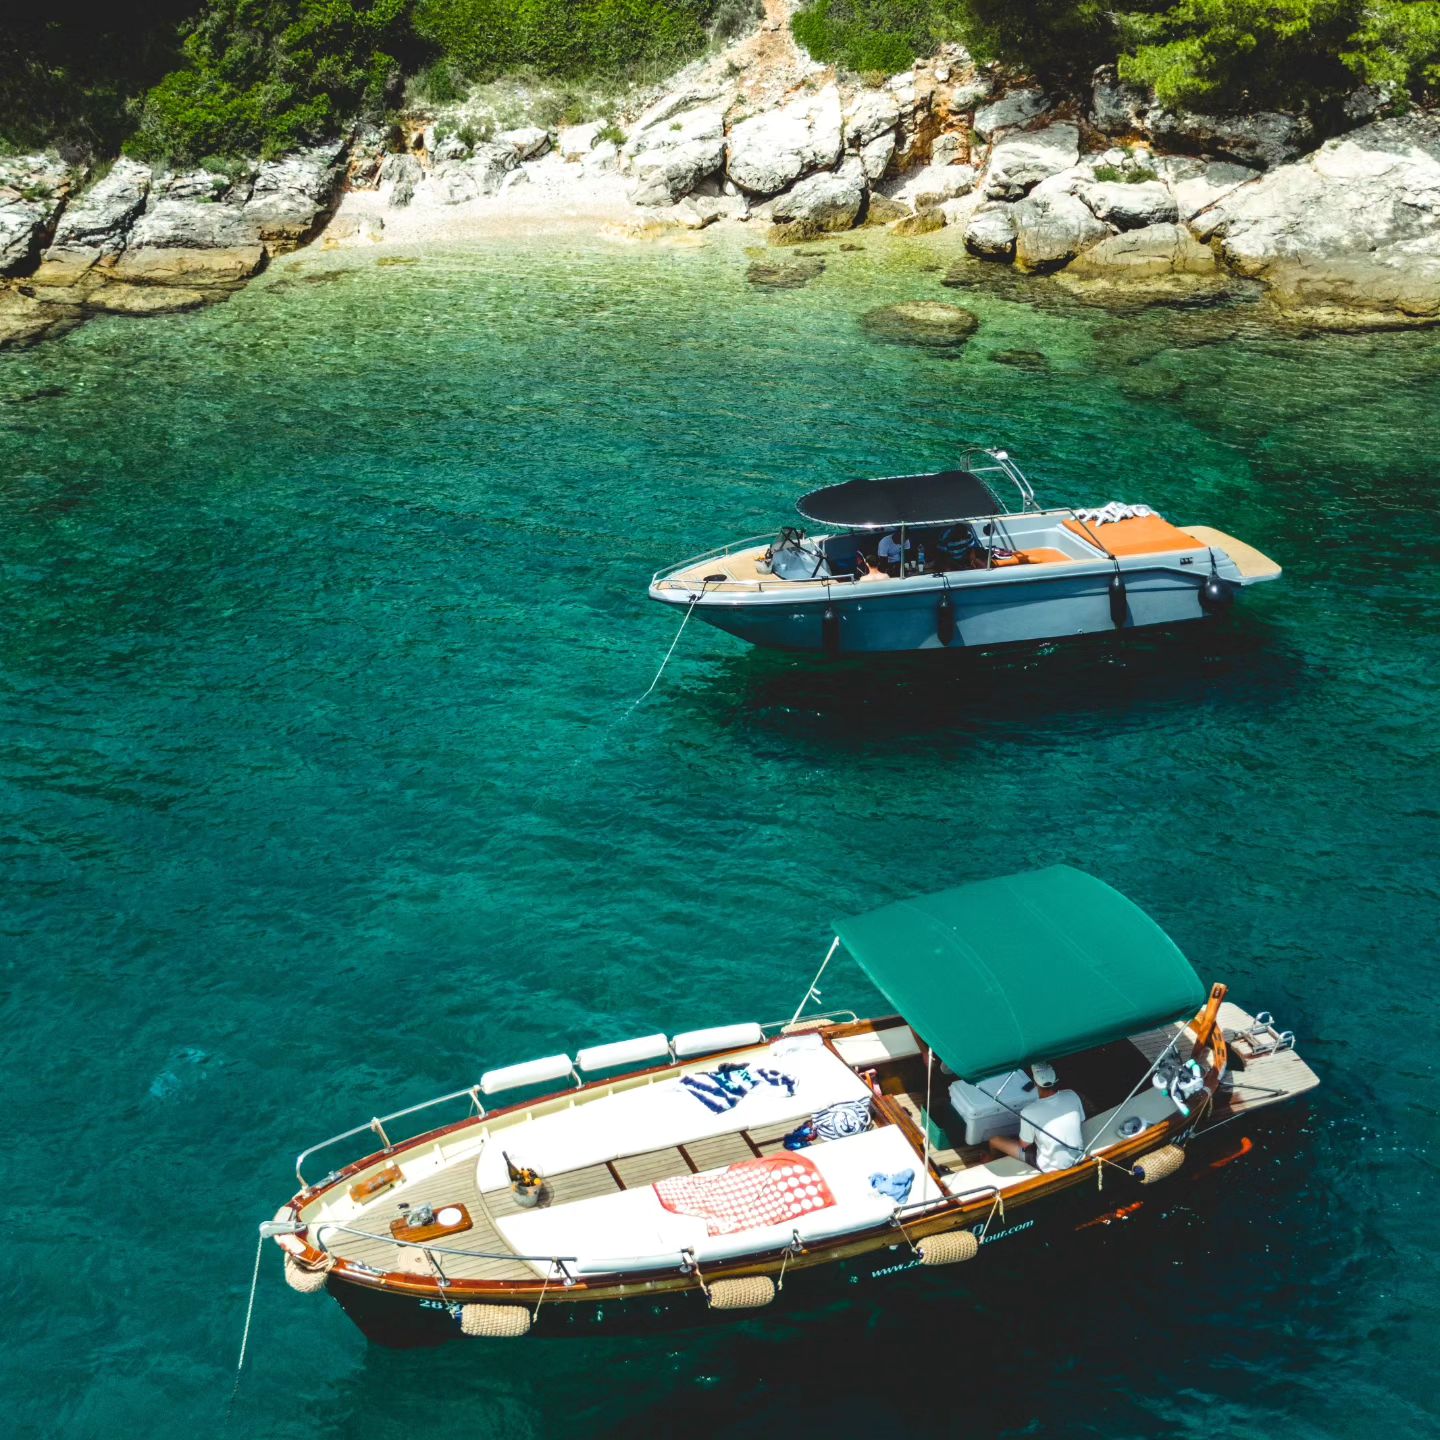 Welcome to our 3 island boat tour ! Reserve your ticket on
 https://www.zadar-boat-tour.com/

#beachlifestyle
#beachlife
#yachtlife
#sealife
#zadar
#croatia
#classic 
#classicboat 
#classicboats 
#retro 
#retroboat
#croatia
#zadar
#boatlife
#boat 
#nautic 
#nautica 
#island 
#mare 
#luxury
#riva
#wine
#vino
#retro
#classic